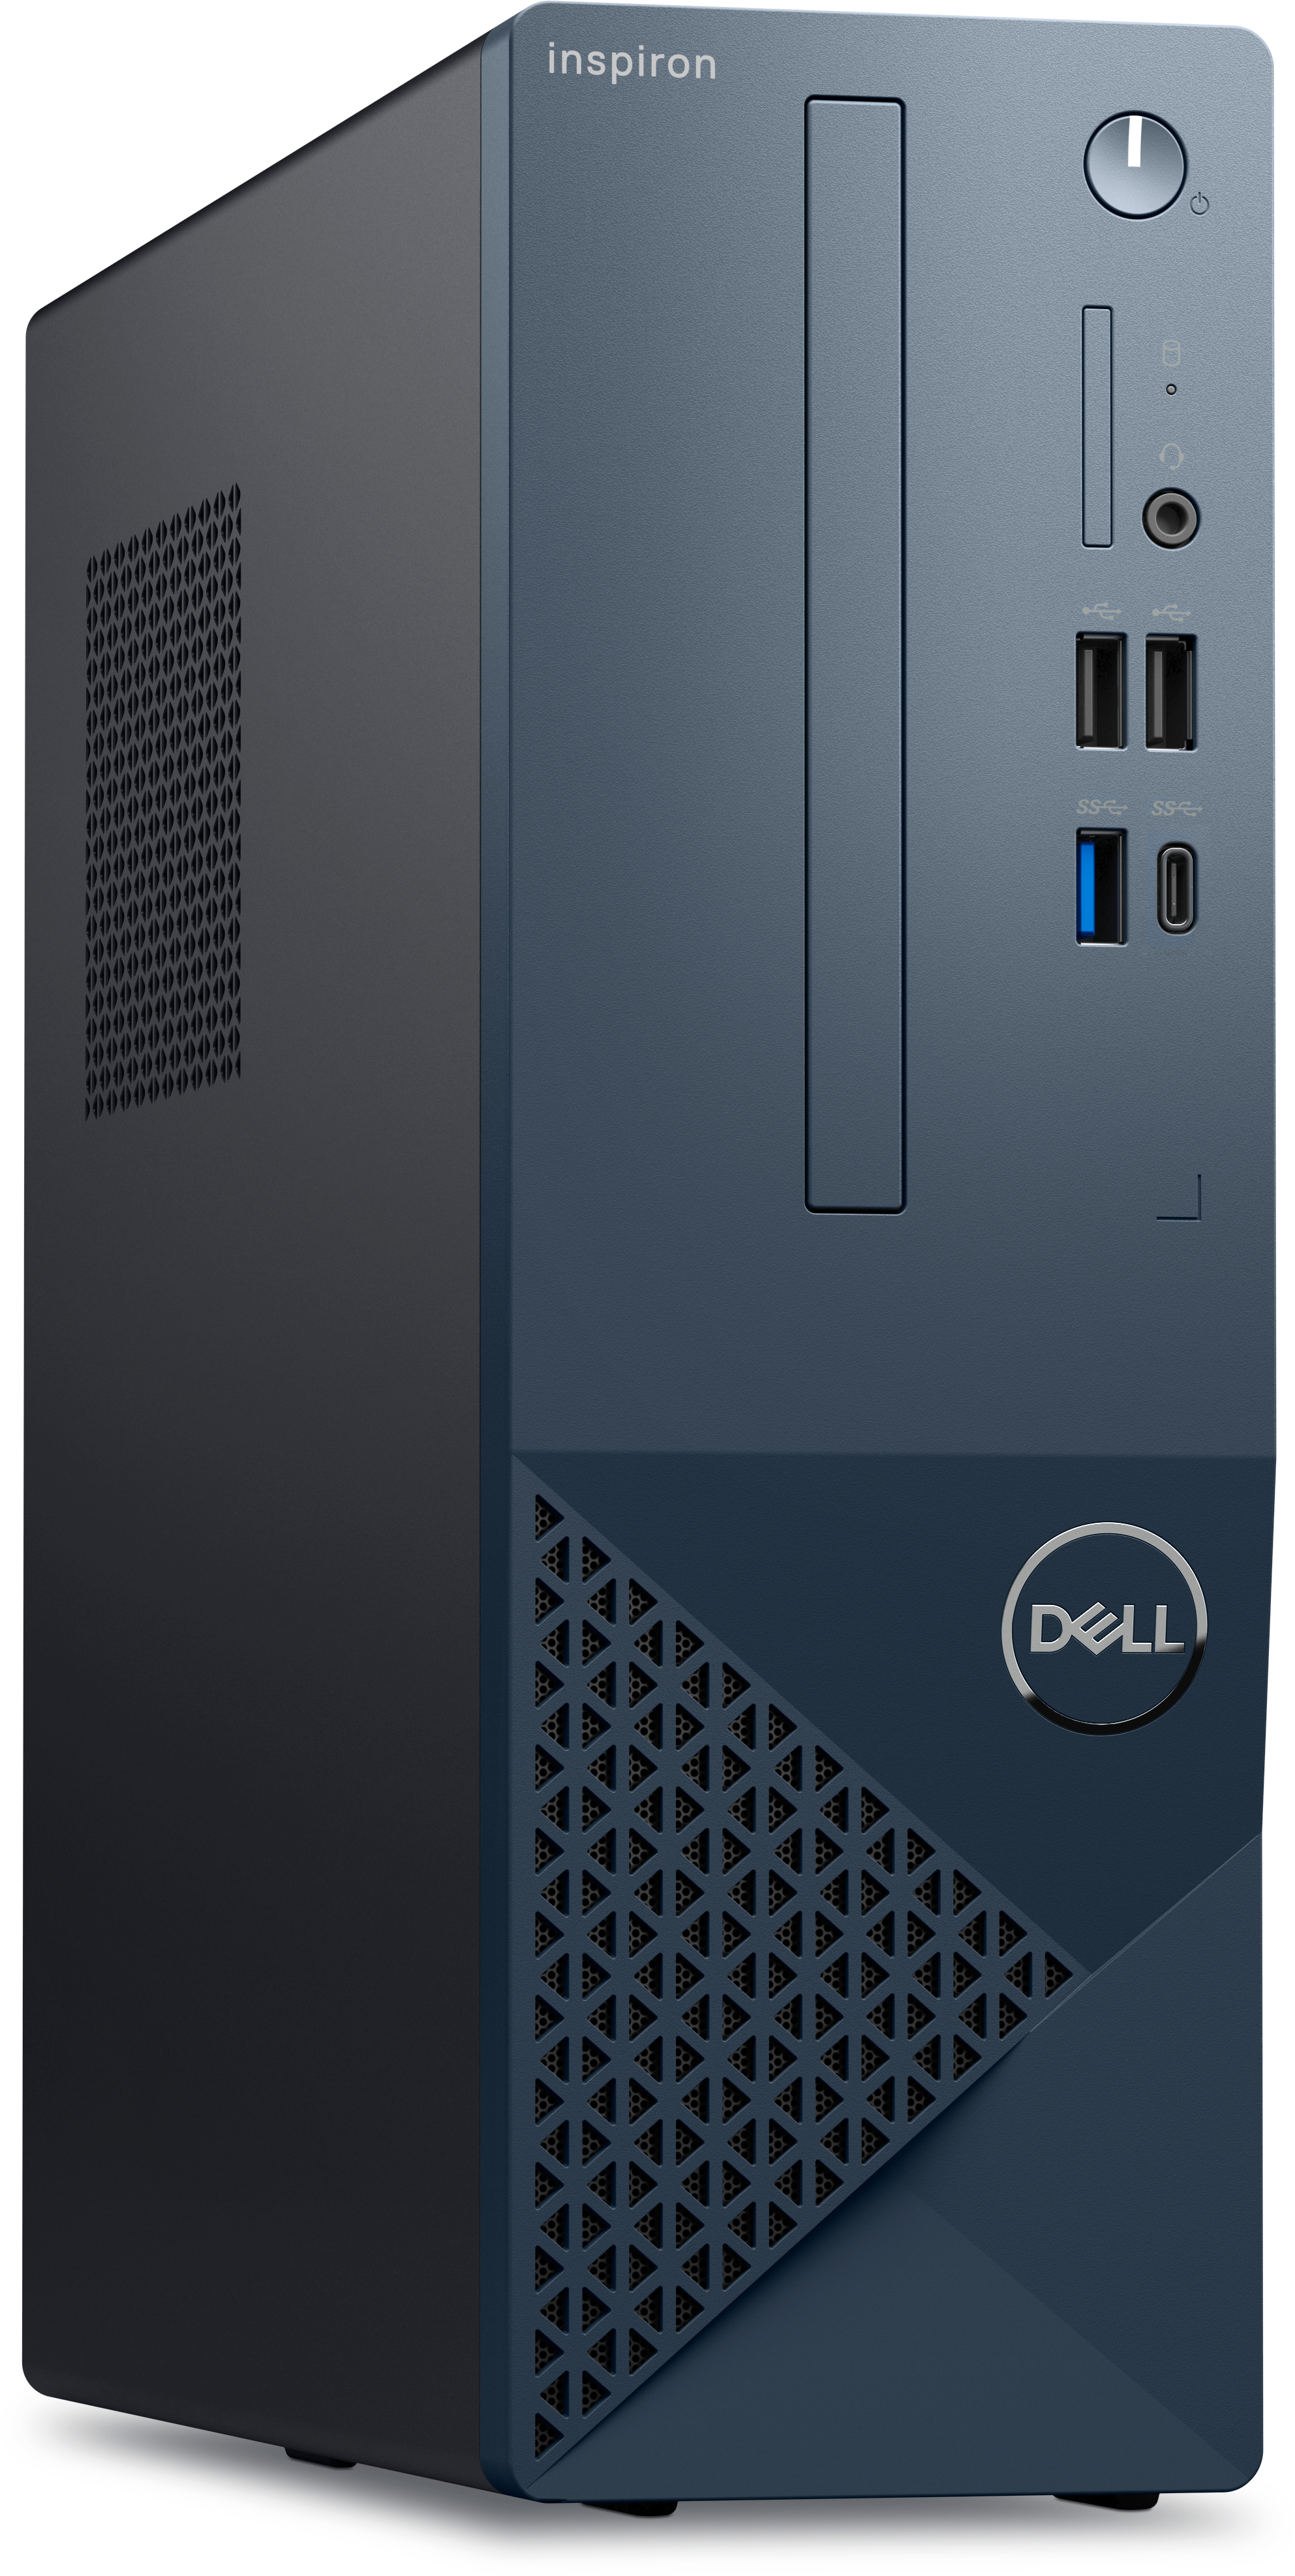 New Inspiron Small Desktop Intel® Core™ i5 14400 Windows 11 Home Intel® UHD Graphics 730 16 GB DDR5 1 TB SSD Powered by the latest Intel® Core™ processors, your Inspiron Desktop is designed for productivity with built-in security features.